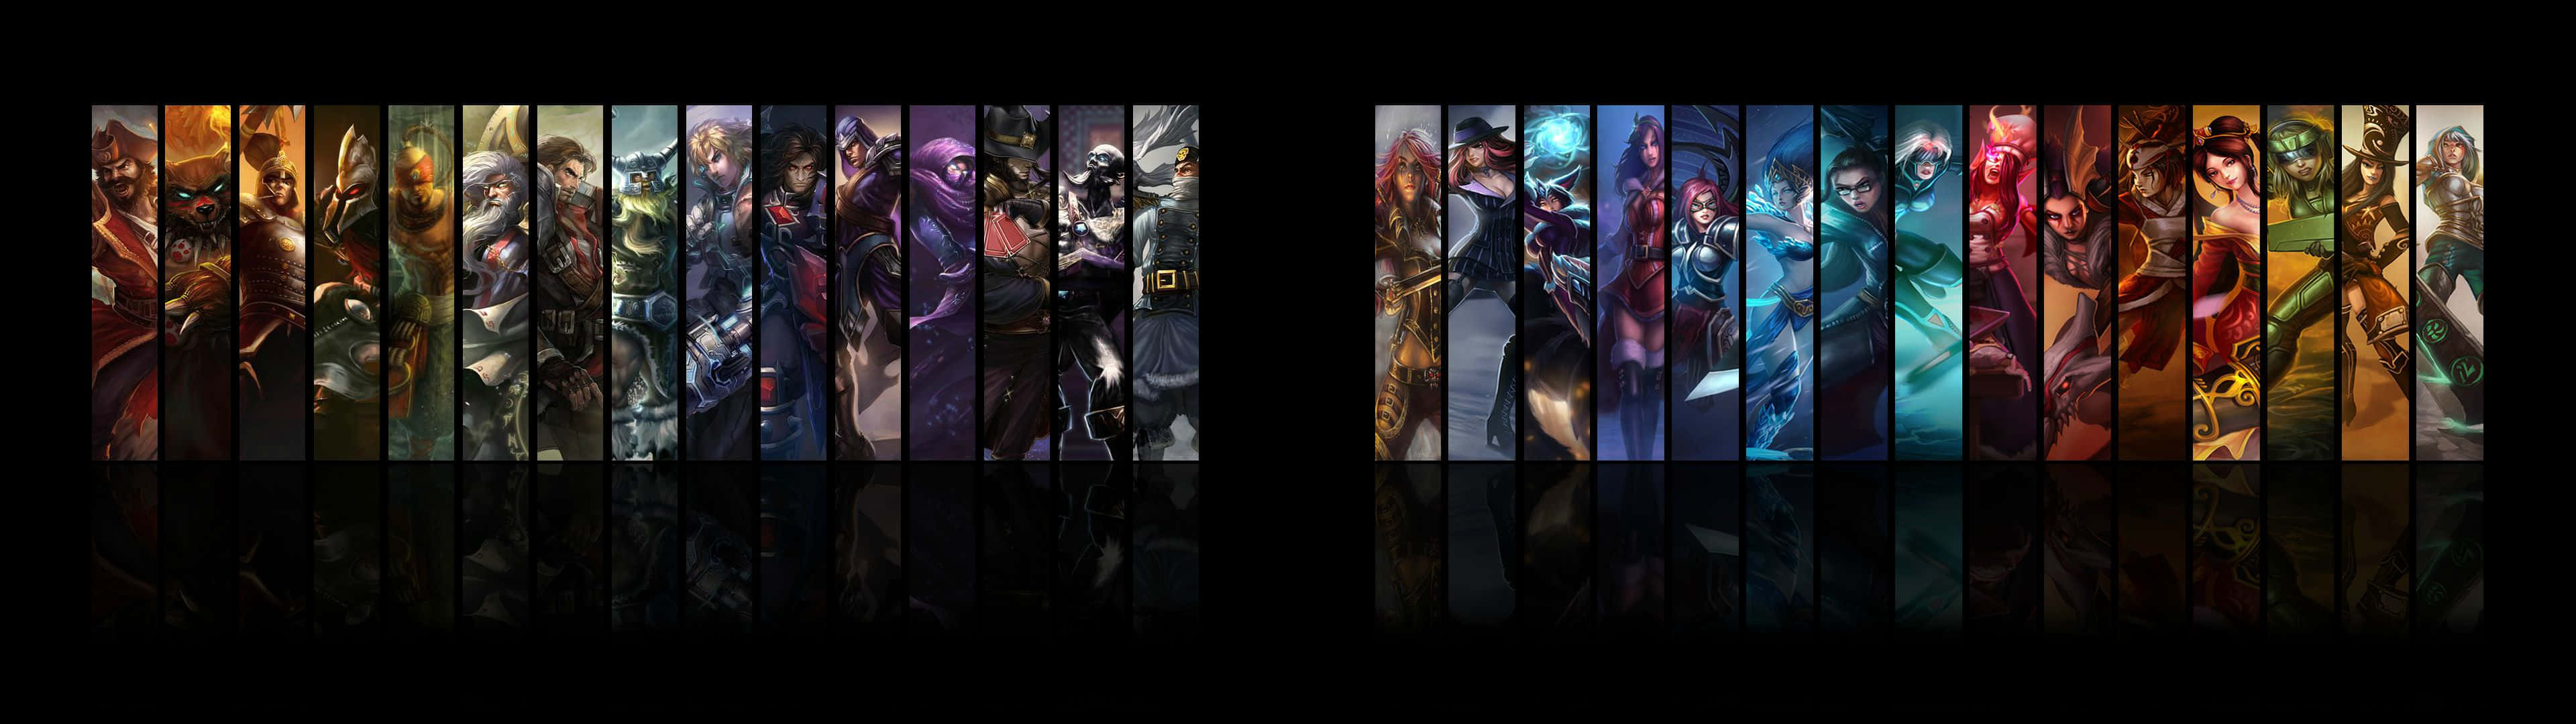 Victory in Sight! Battle with your Friends in Dual Screen League of Legends Wallpaper